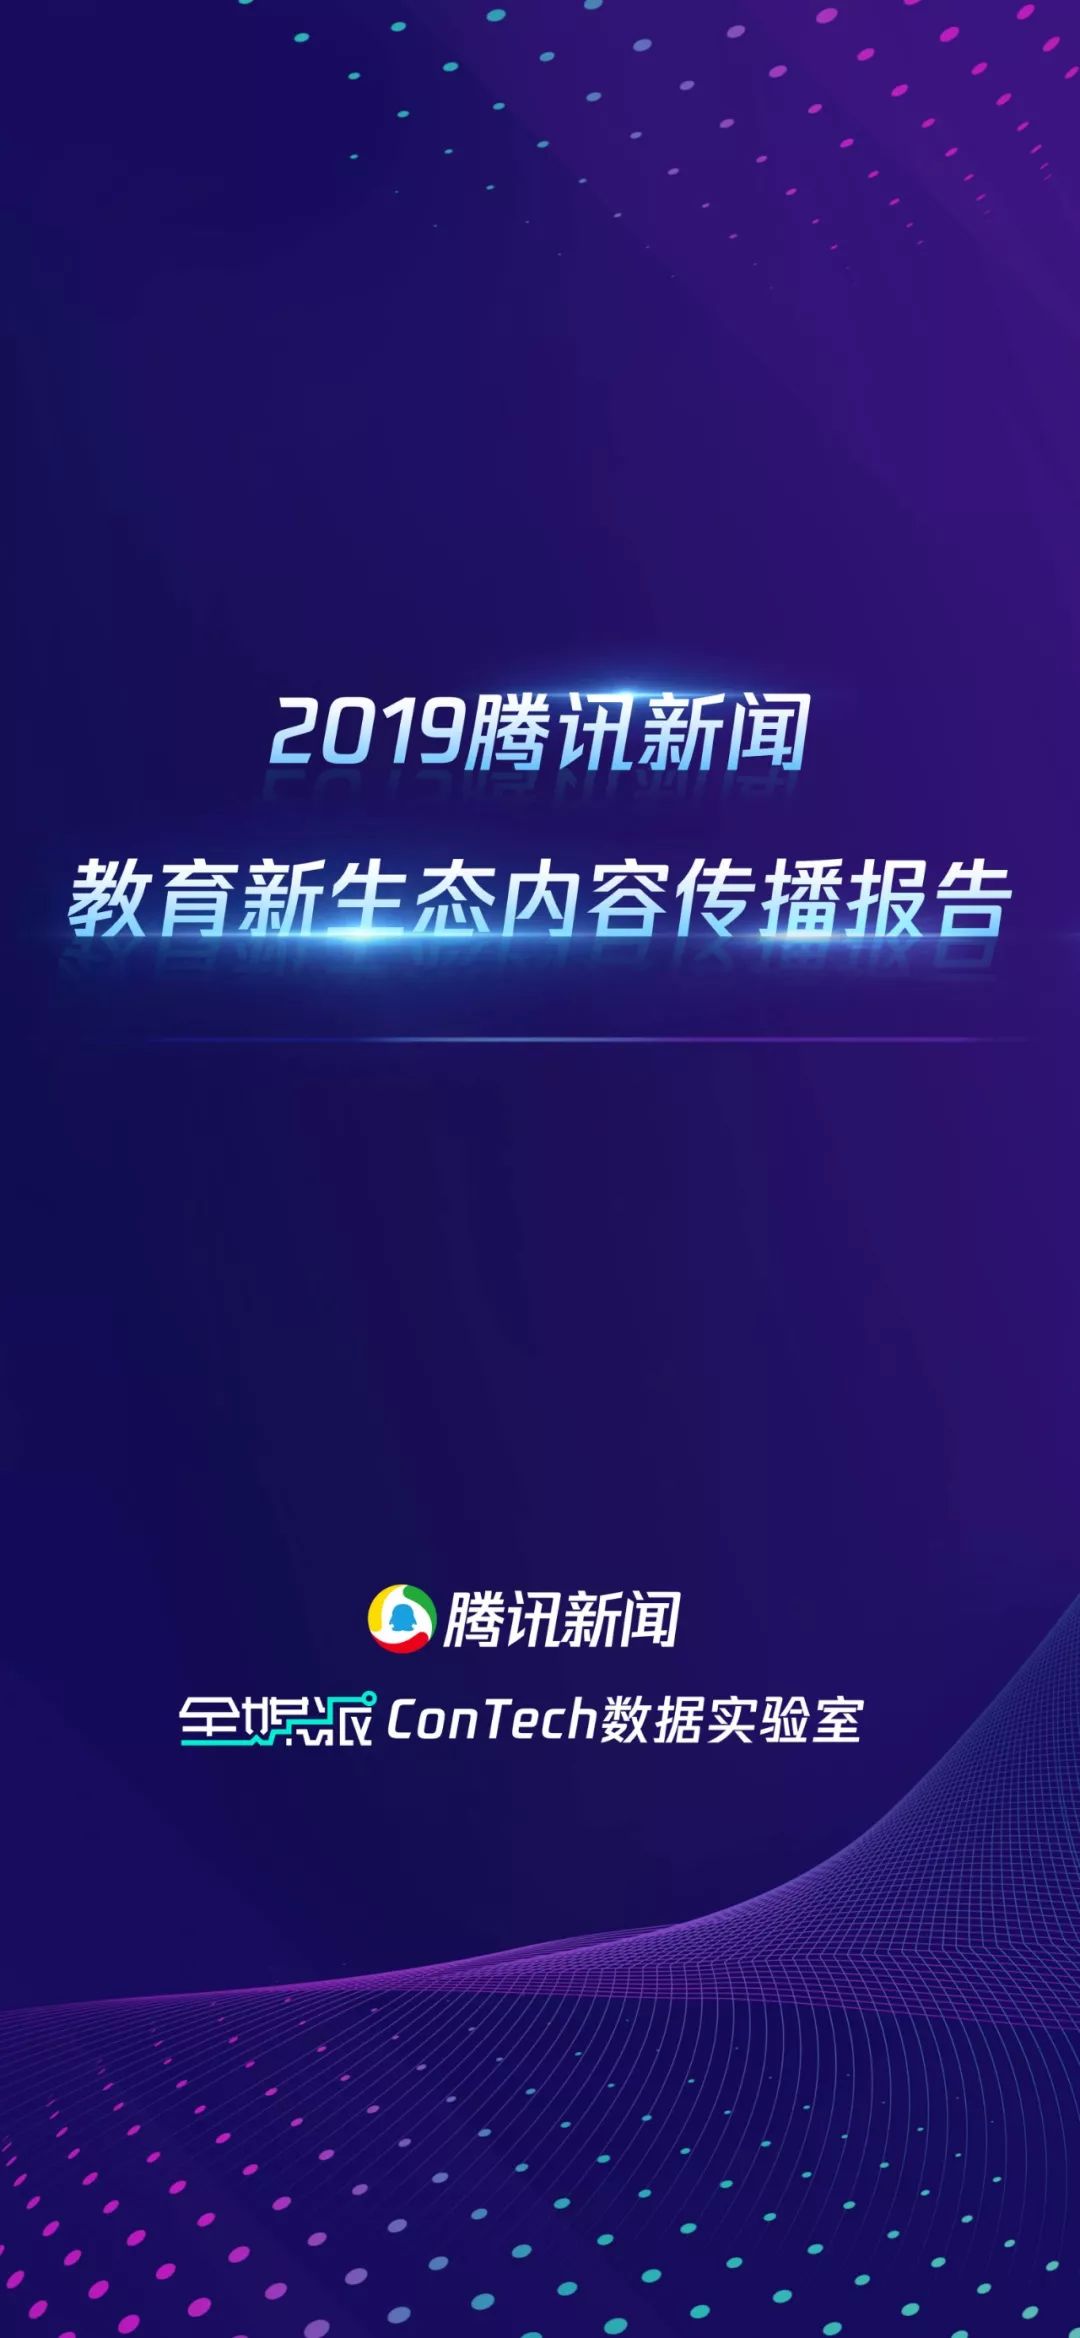 Tencent News ConTech Data Lab Releases 2019 Education New Ecological Content Dissemination Report